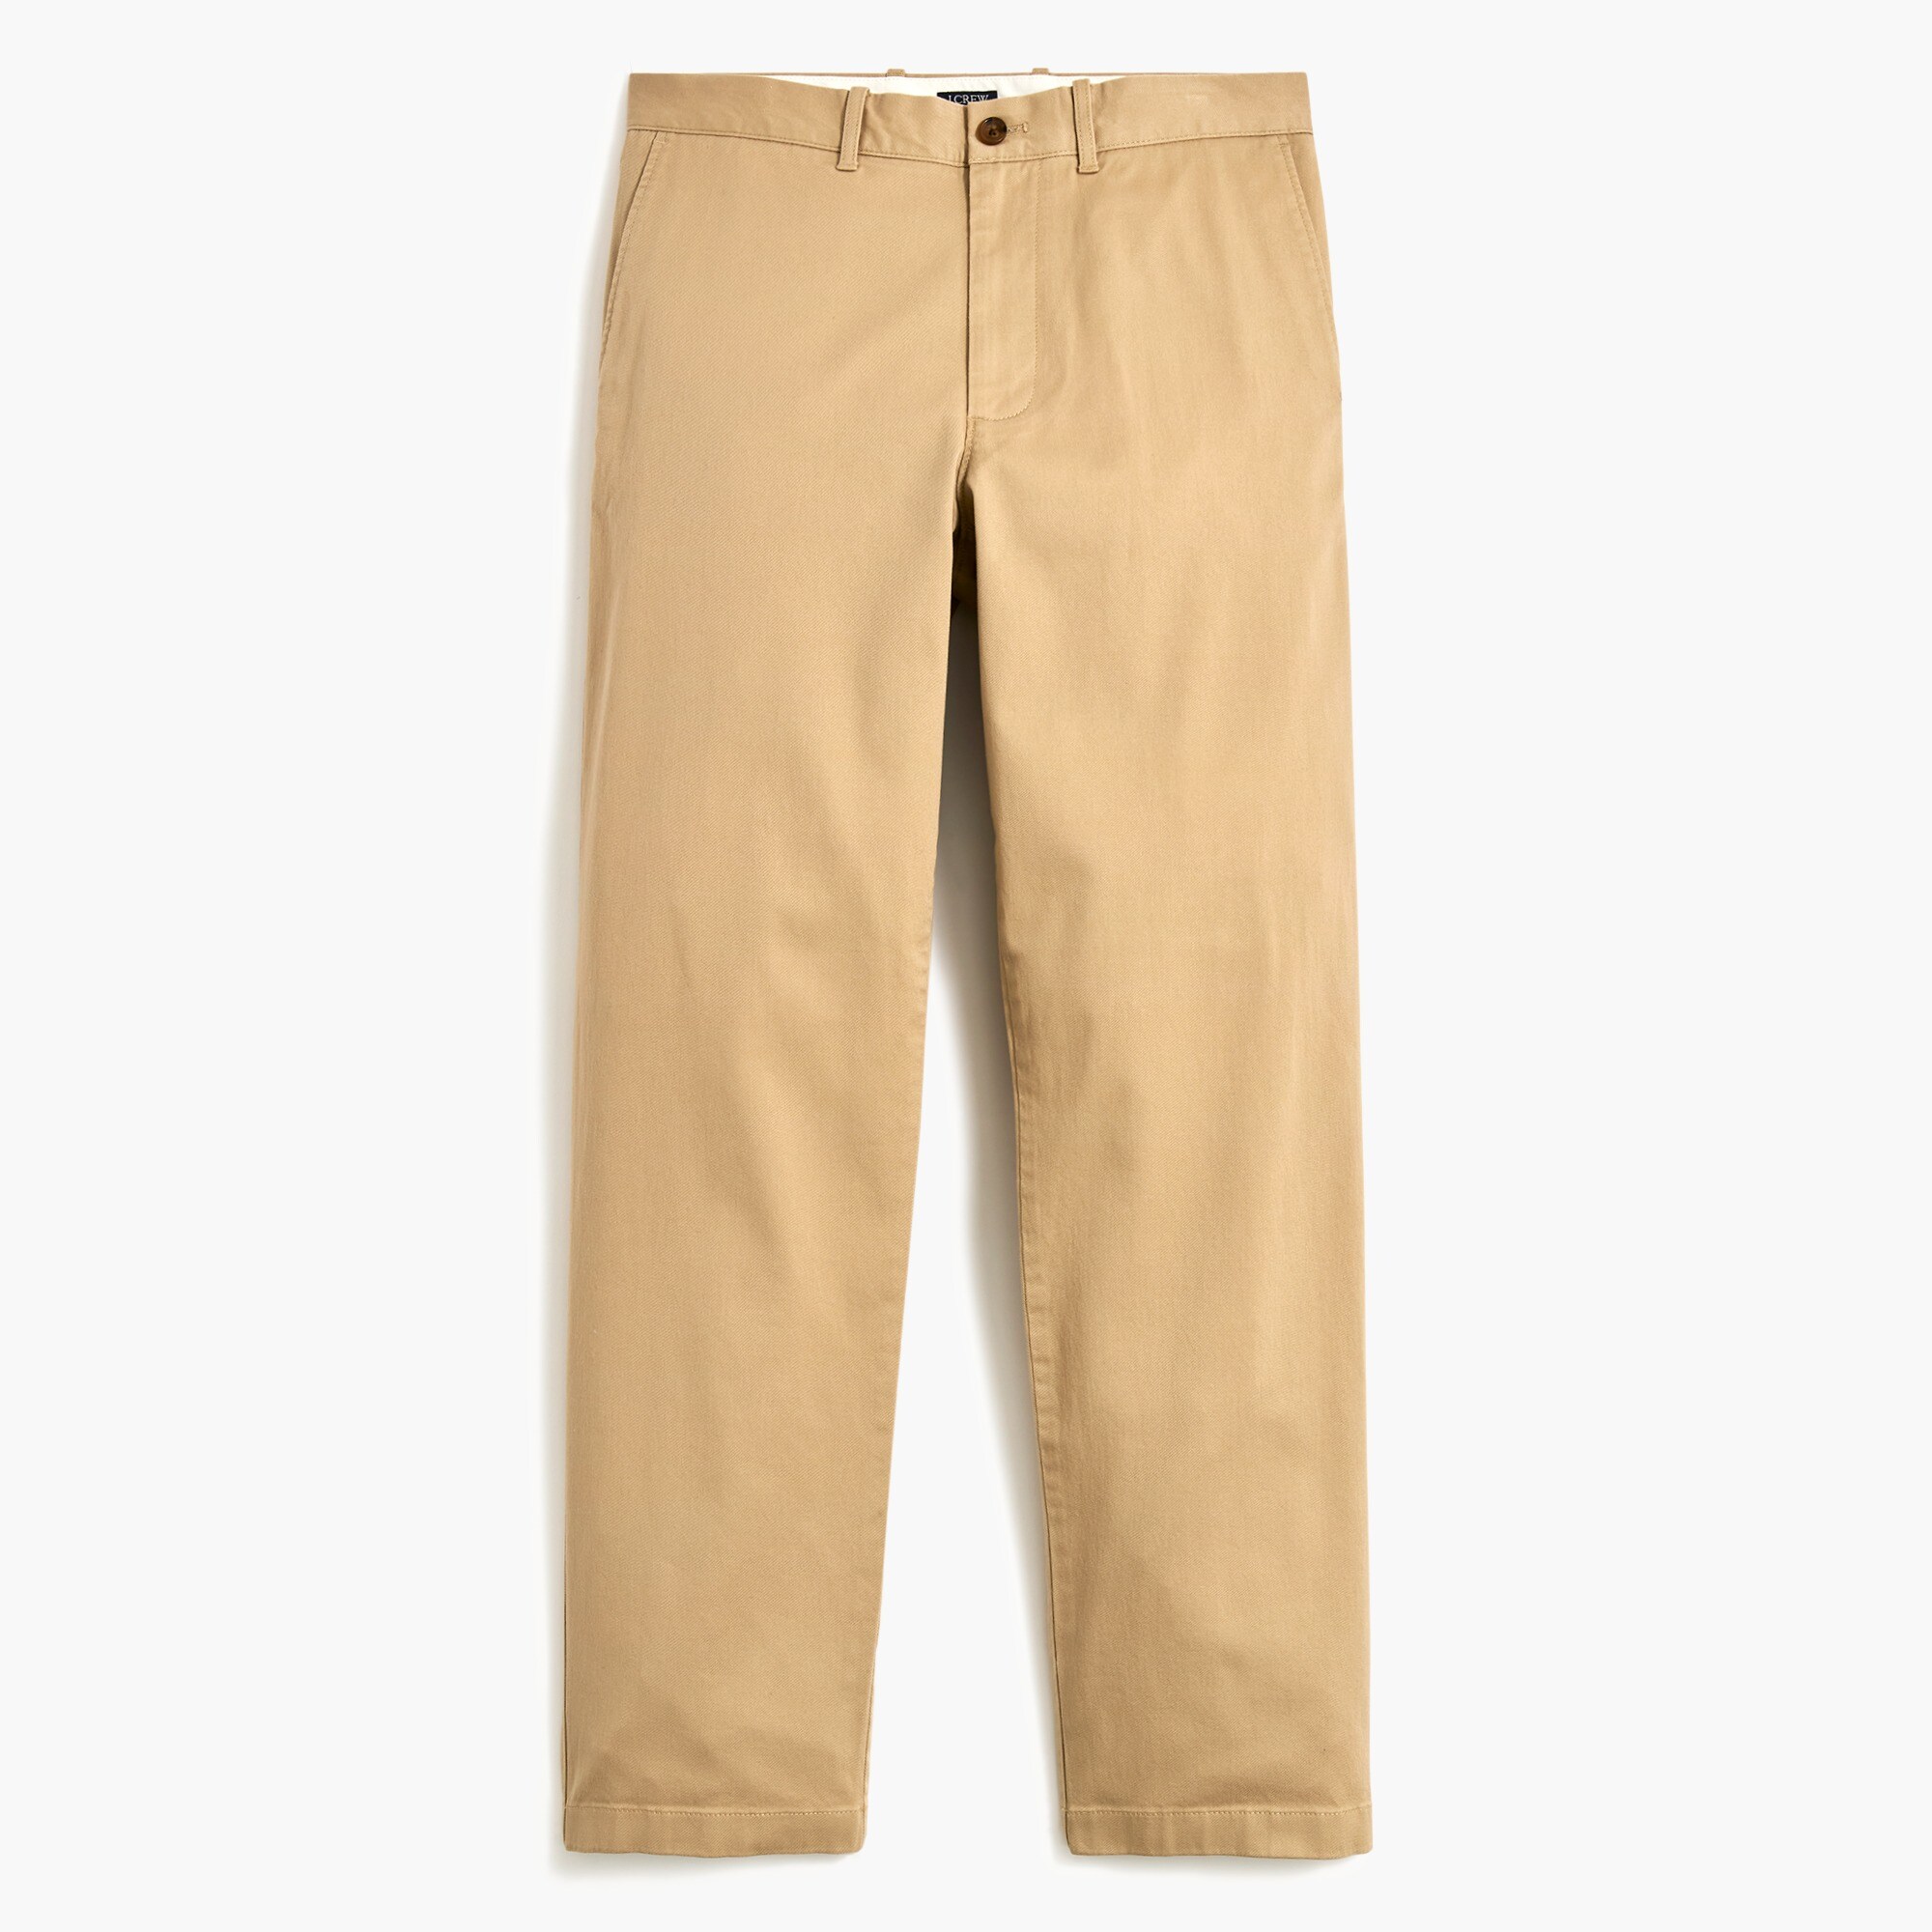  Relaxed-fit flex chino pant